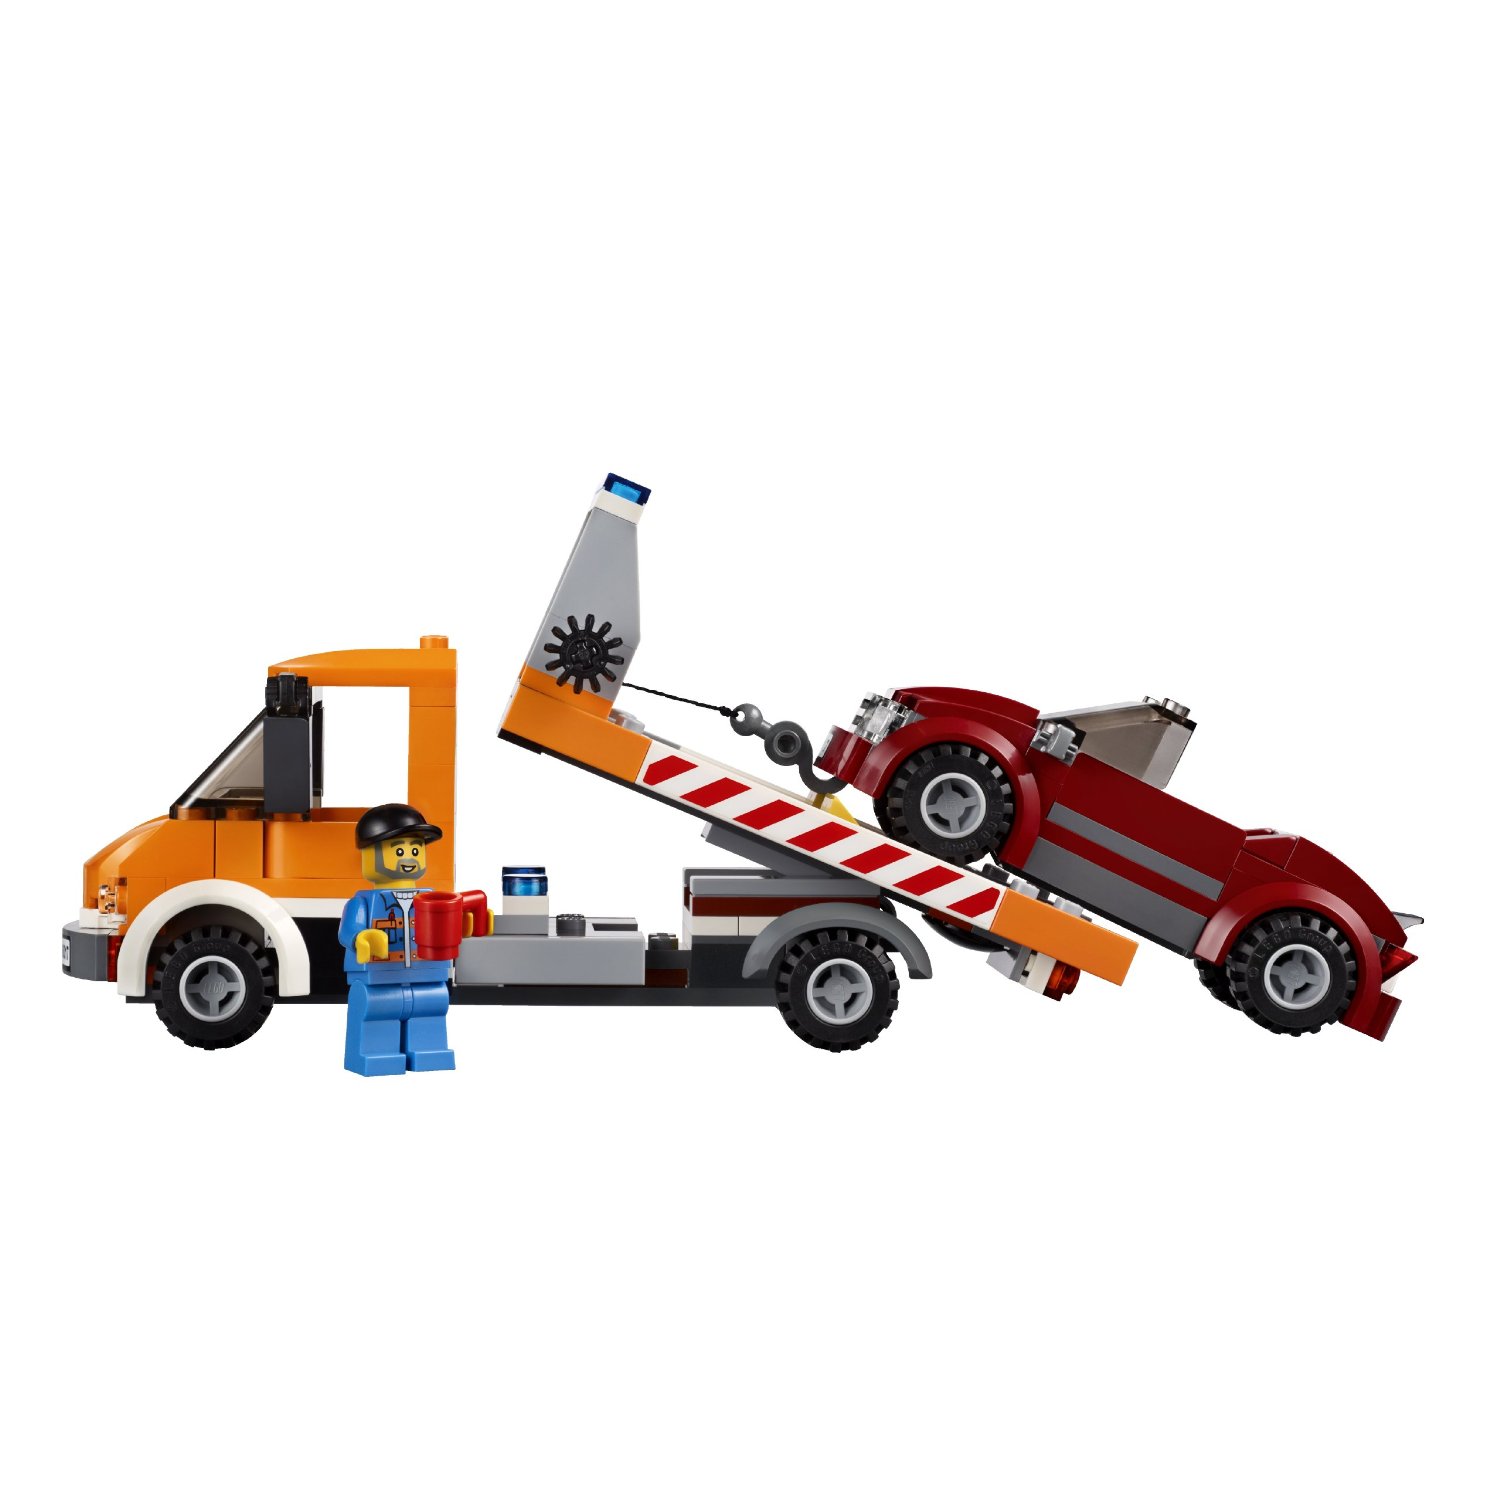 Lego City Flatbed Truck - International Towing & Recovery Museum